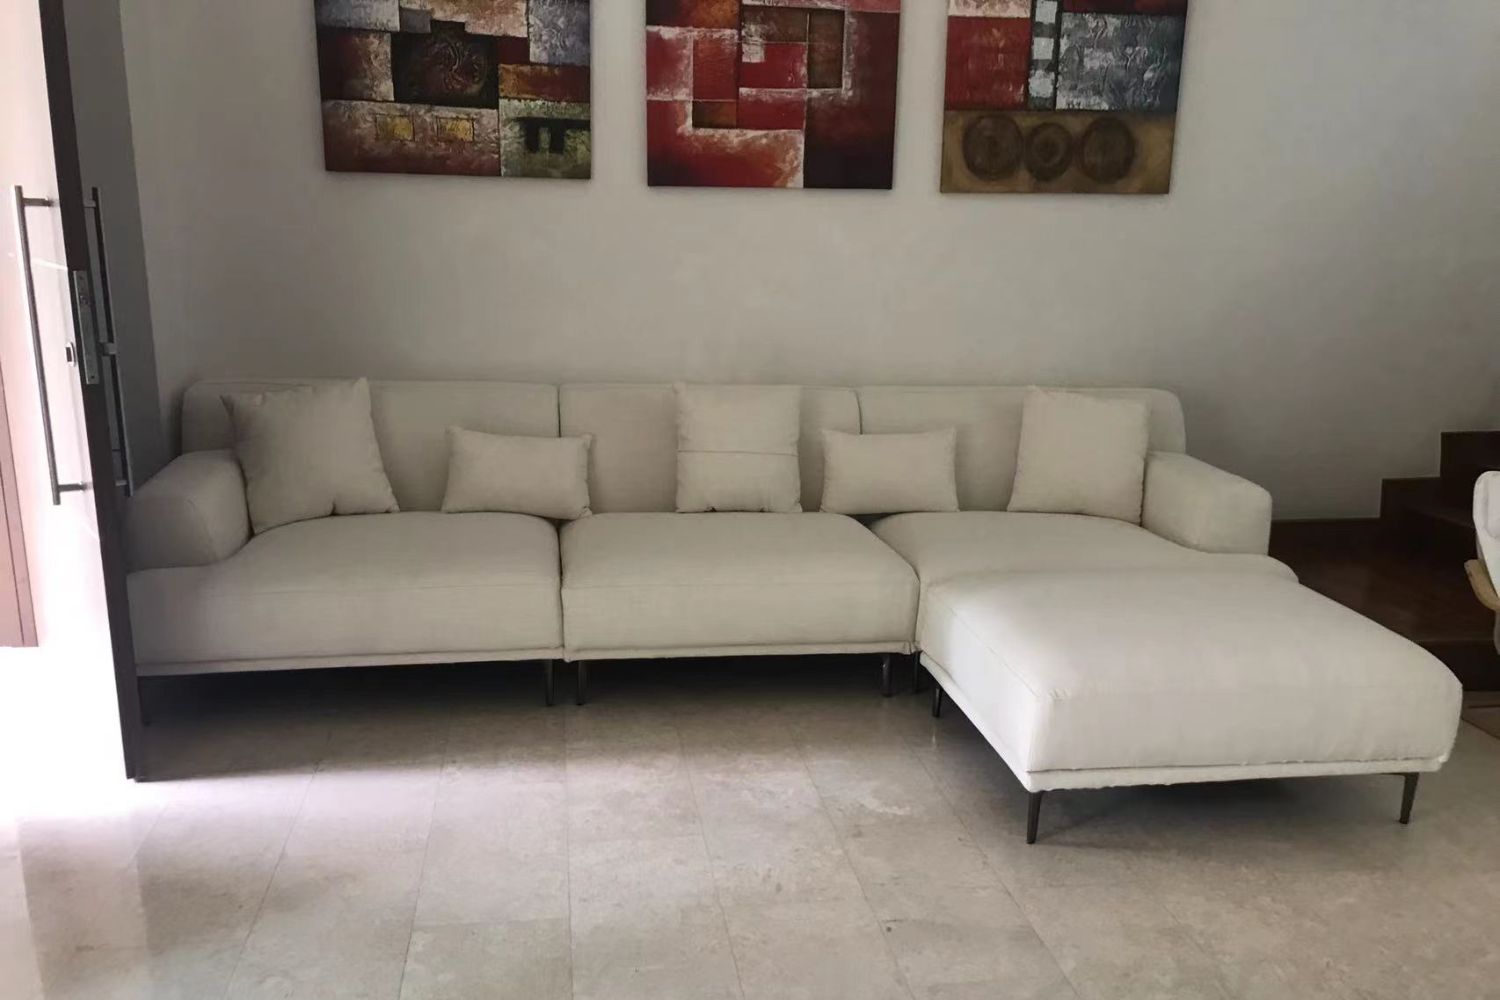 Large 330cm Crystal white fabric sofa + ottoman in customer's living room